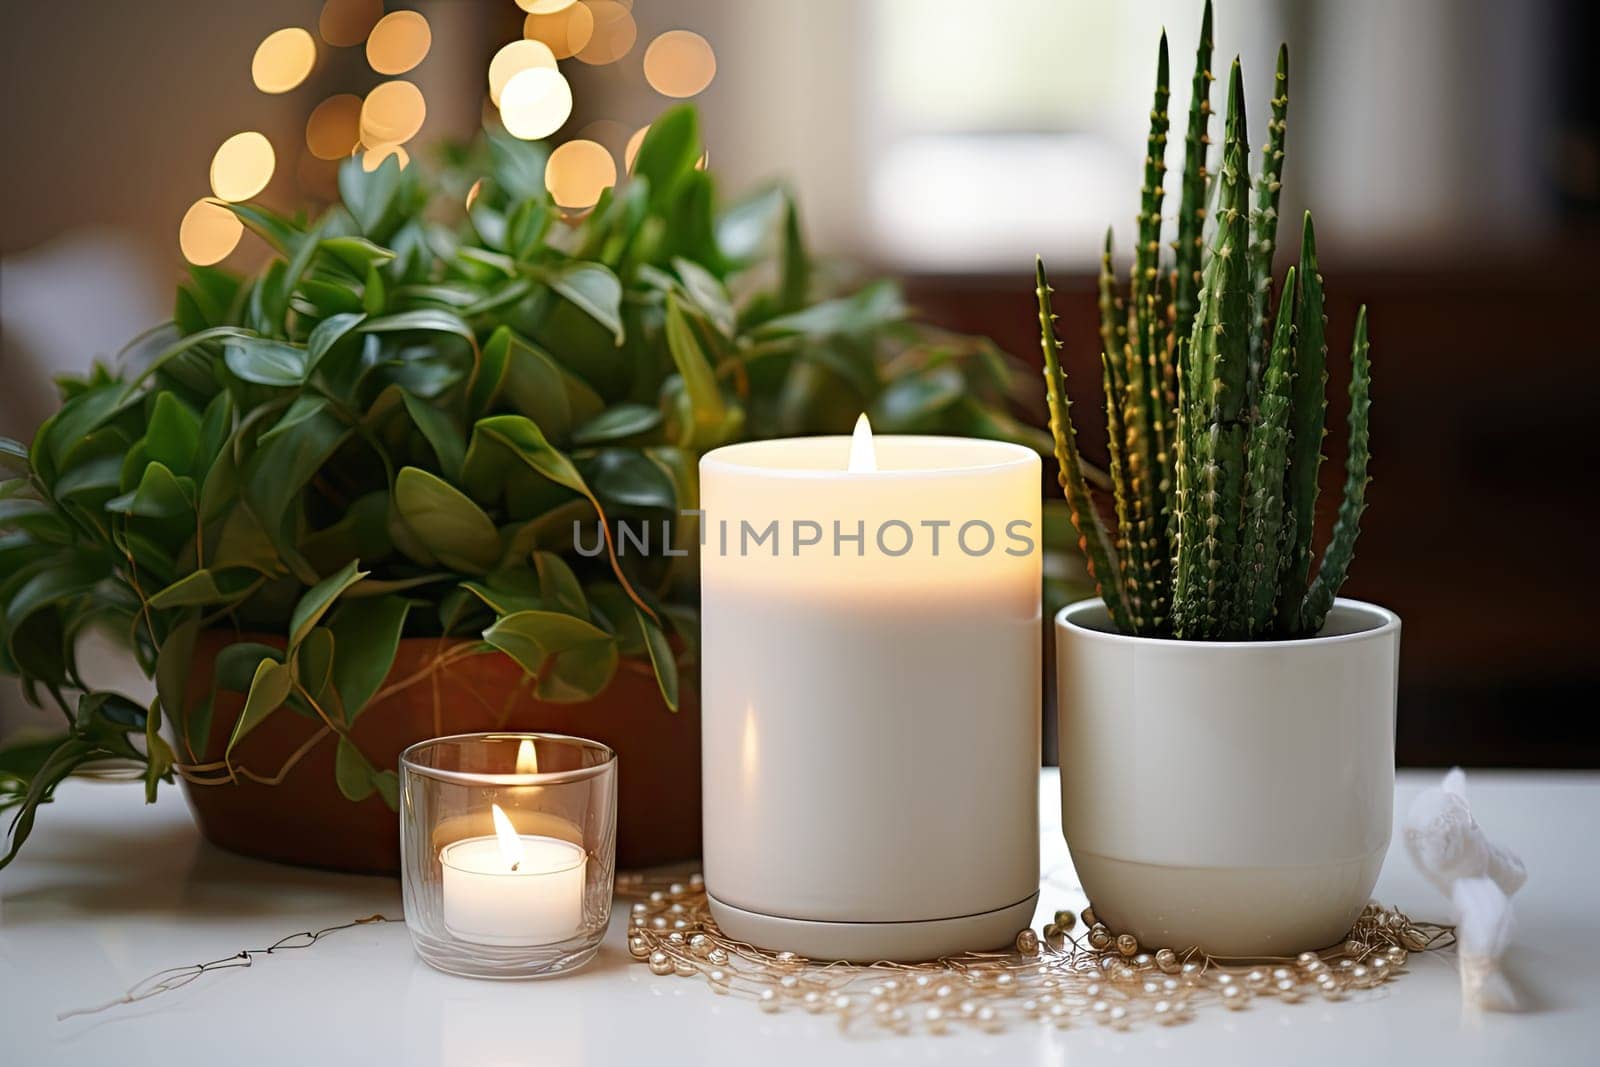 some plants and candles on a table with christmas lights in the background photo is taken from above, but no one can be seen